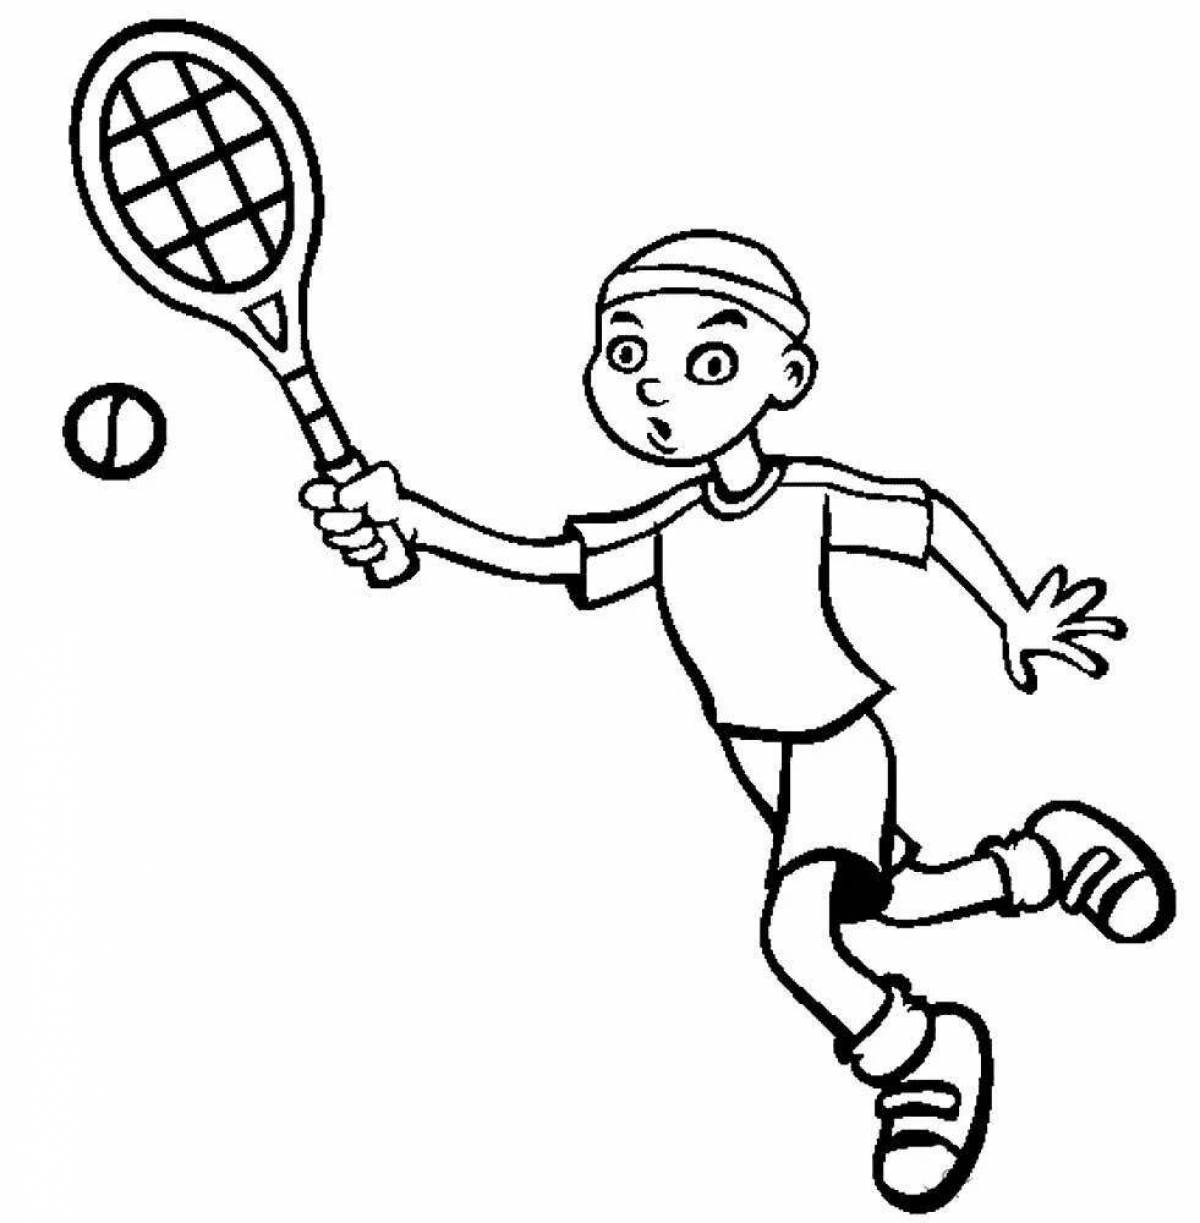 Delightful tennis coloring book for kids